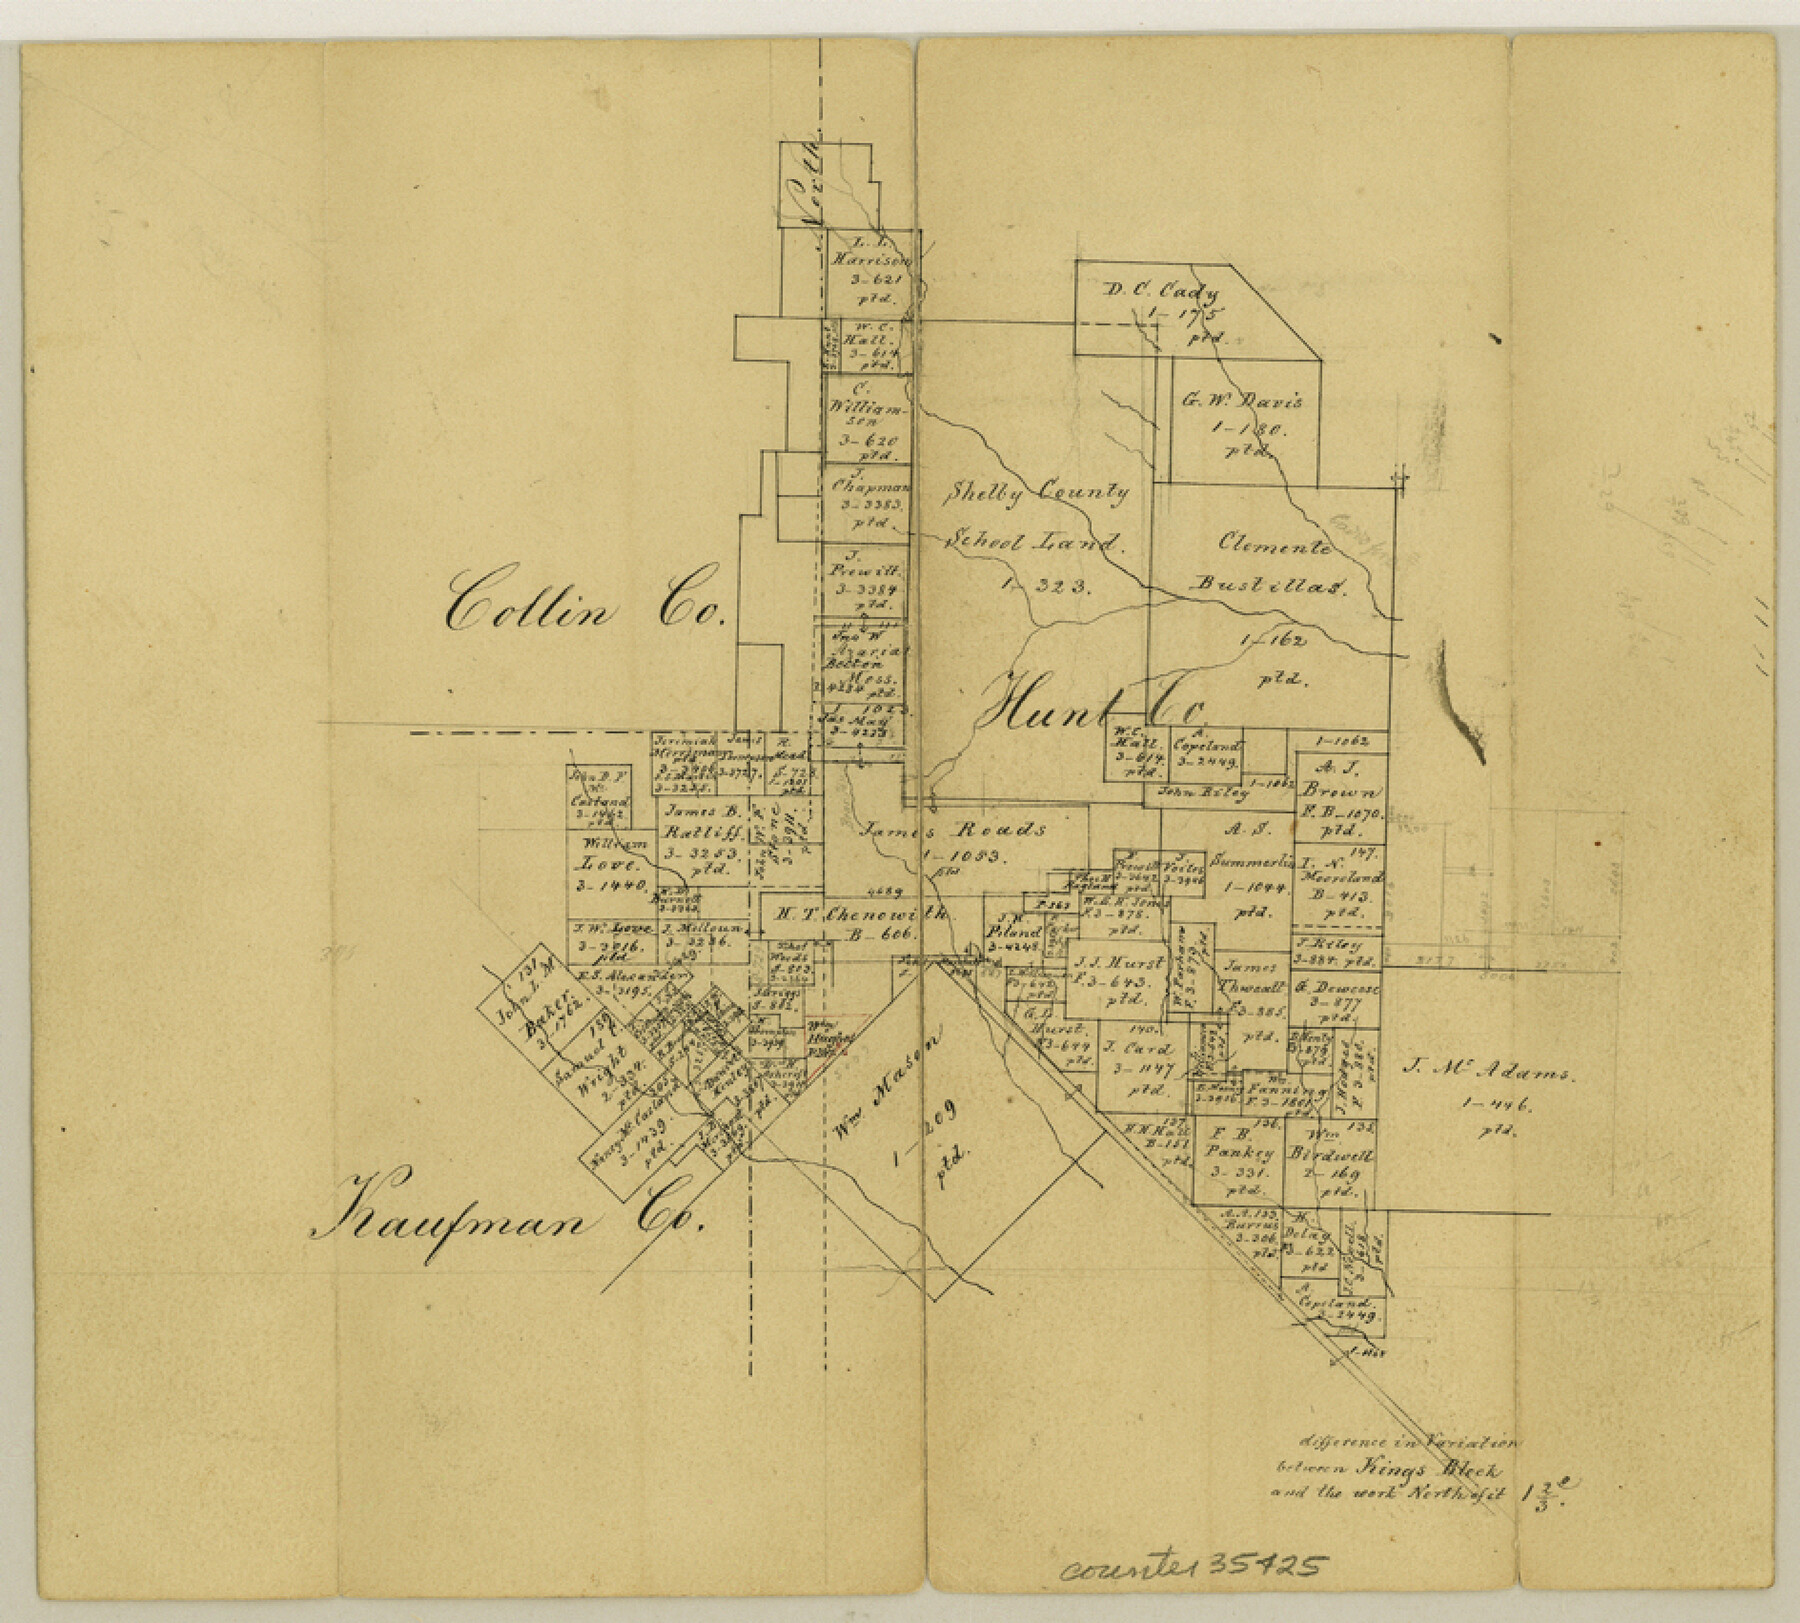 35425, Rockwall County Sketch File 6, General Map Collection